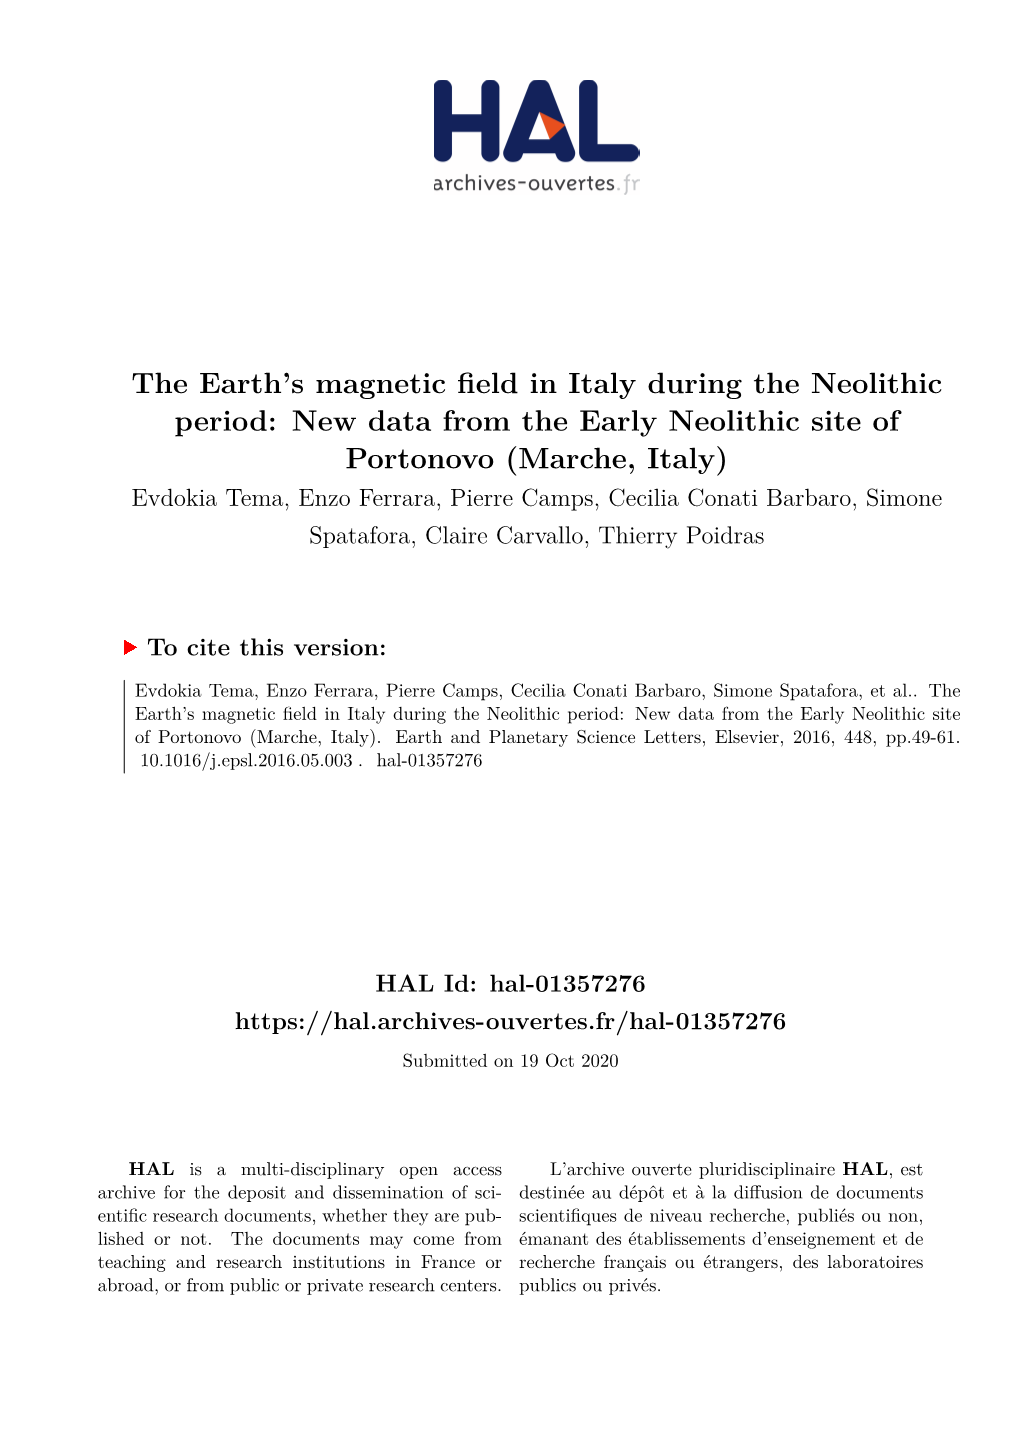 The Earth's Magnetic Field in Italy During the Neolithic Period